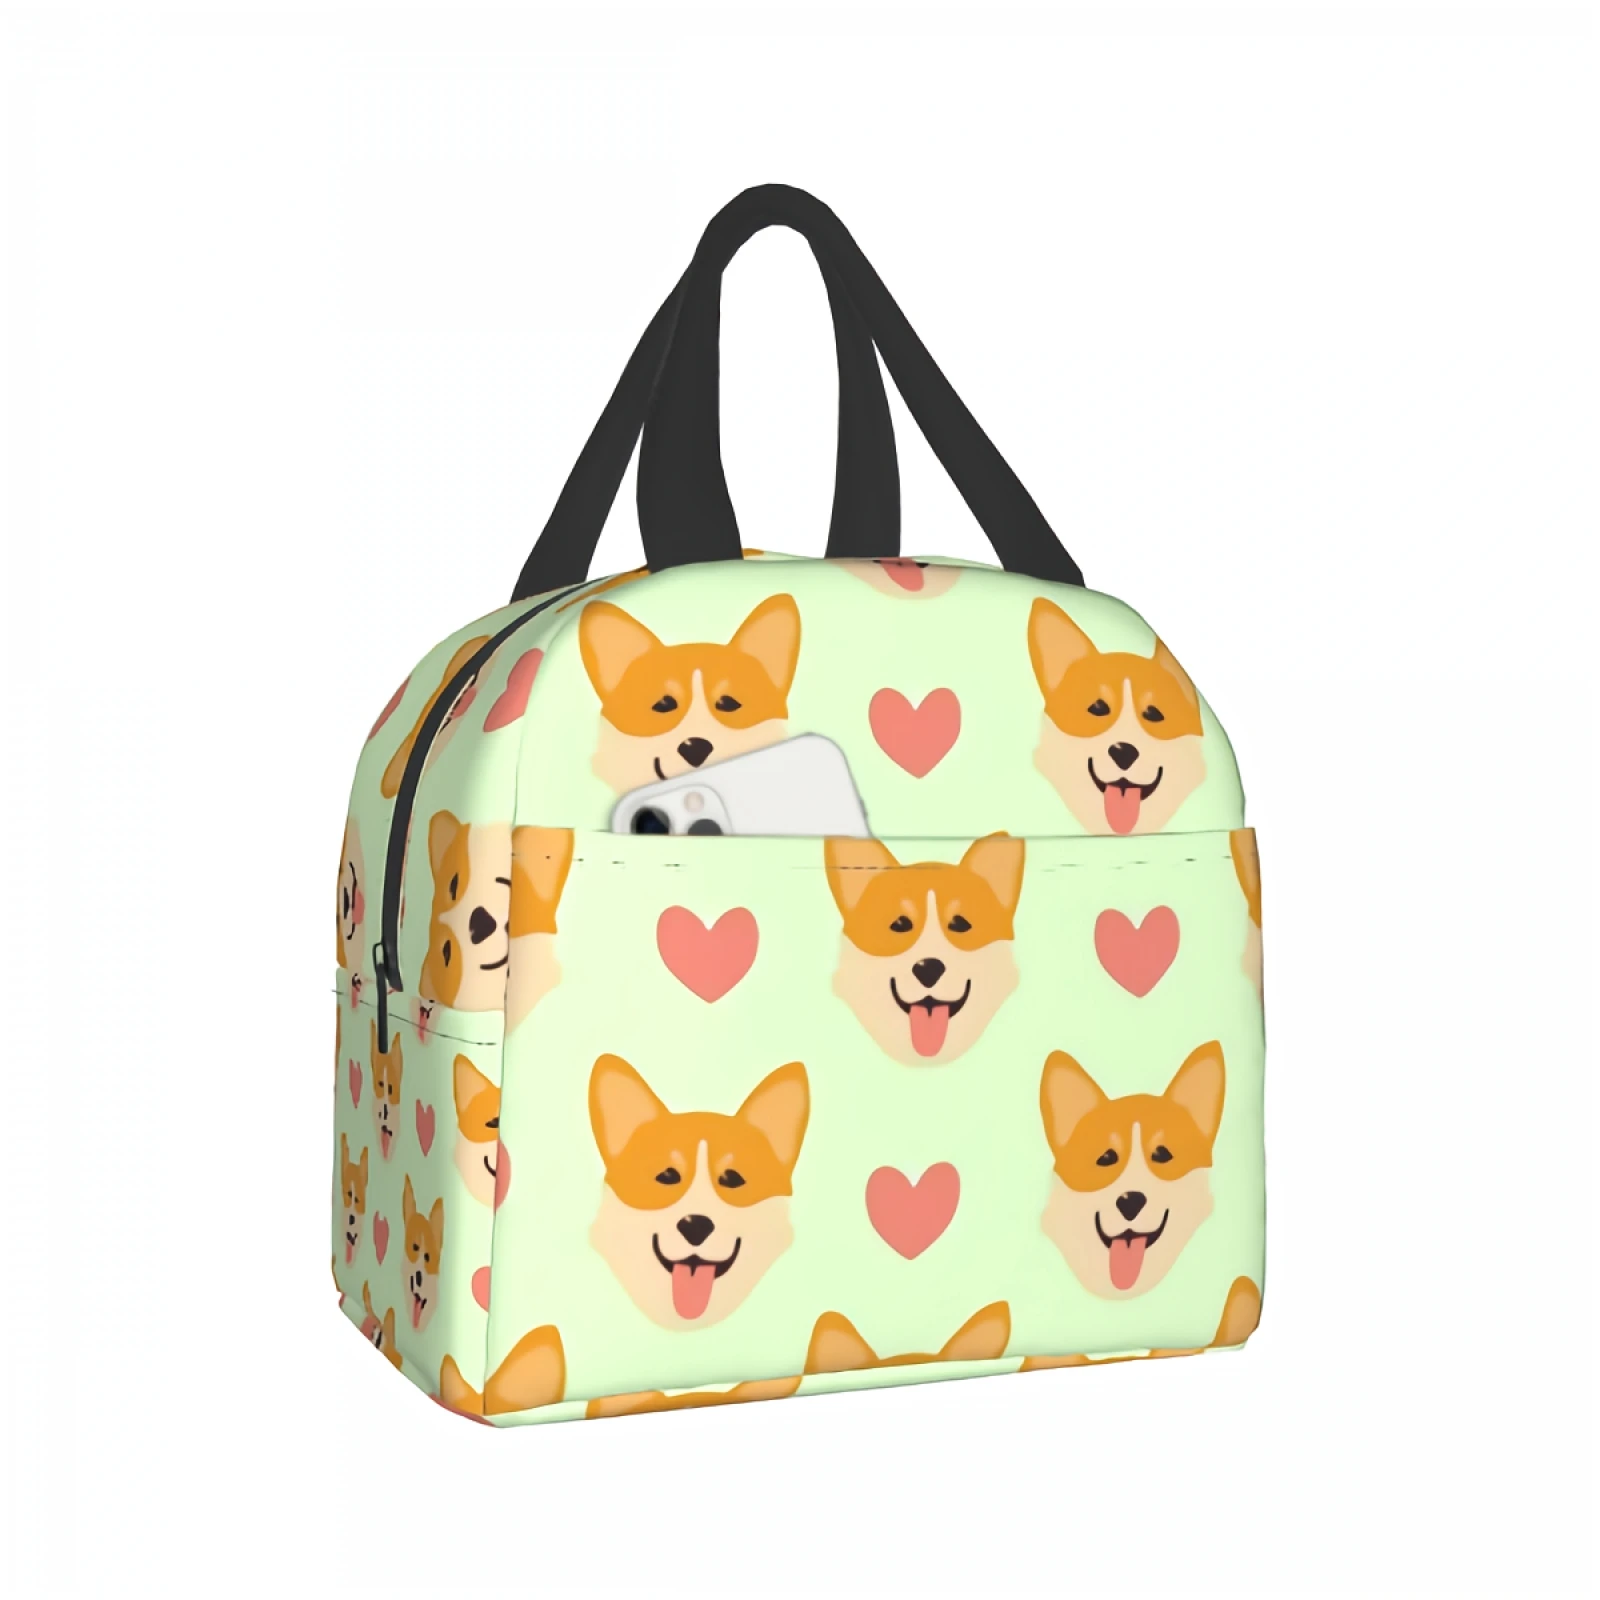 

Imiss Cute Pattern With Corgi Reusable Insulated Lunch Bag Adorable Cartoon Puppy Animal Print Cooler Tote Box with Front Pocket